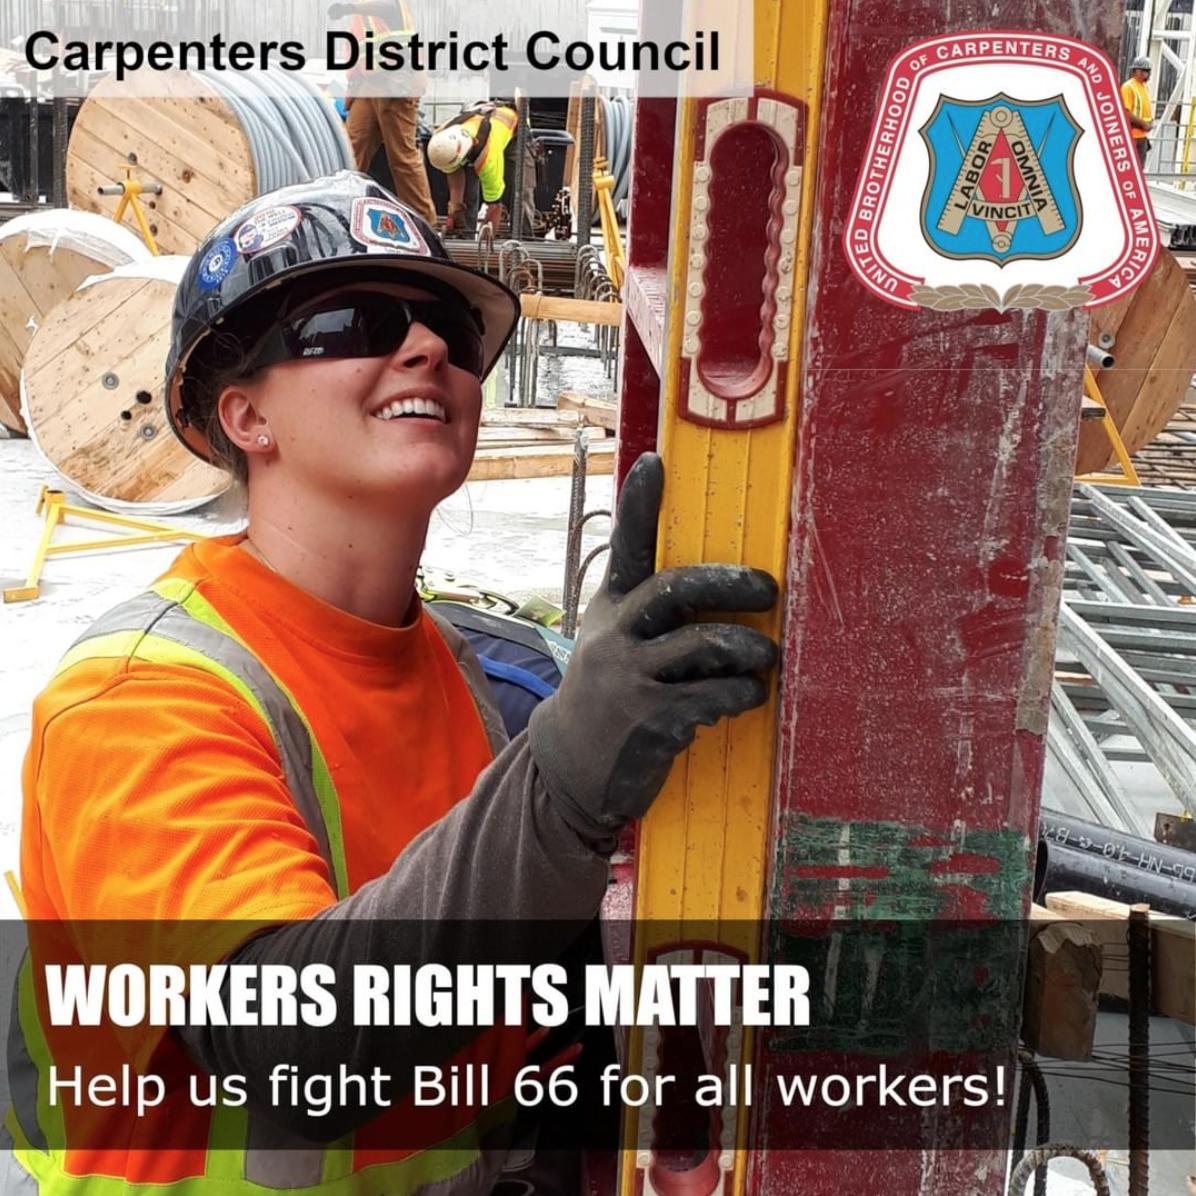 The Carpenters Union needs your support to fight BILL 66 and defend Workers Rights for all Ontarians. Visit: killbill66.com⁣

⁣#onpoli #ondp #olp #gpo #ontpoli #workersrights #killbill66 #fightbill66 #bill66 #Ontario #carpentersunion⁣